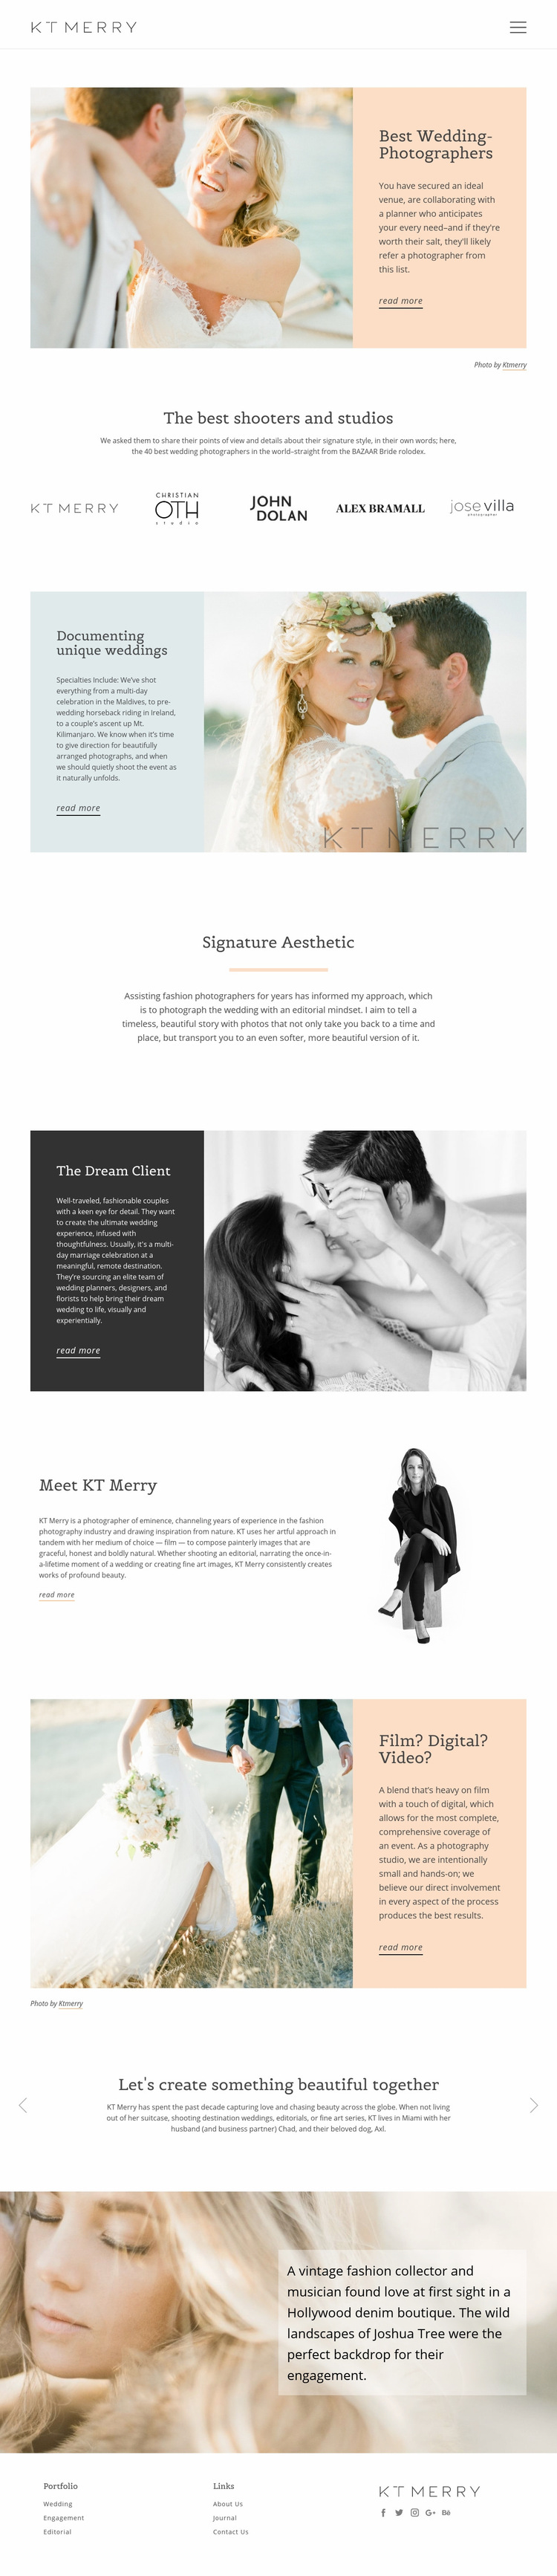 Shooters for special wedding Web Page Design